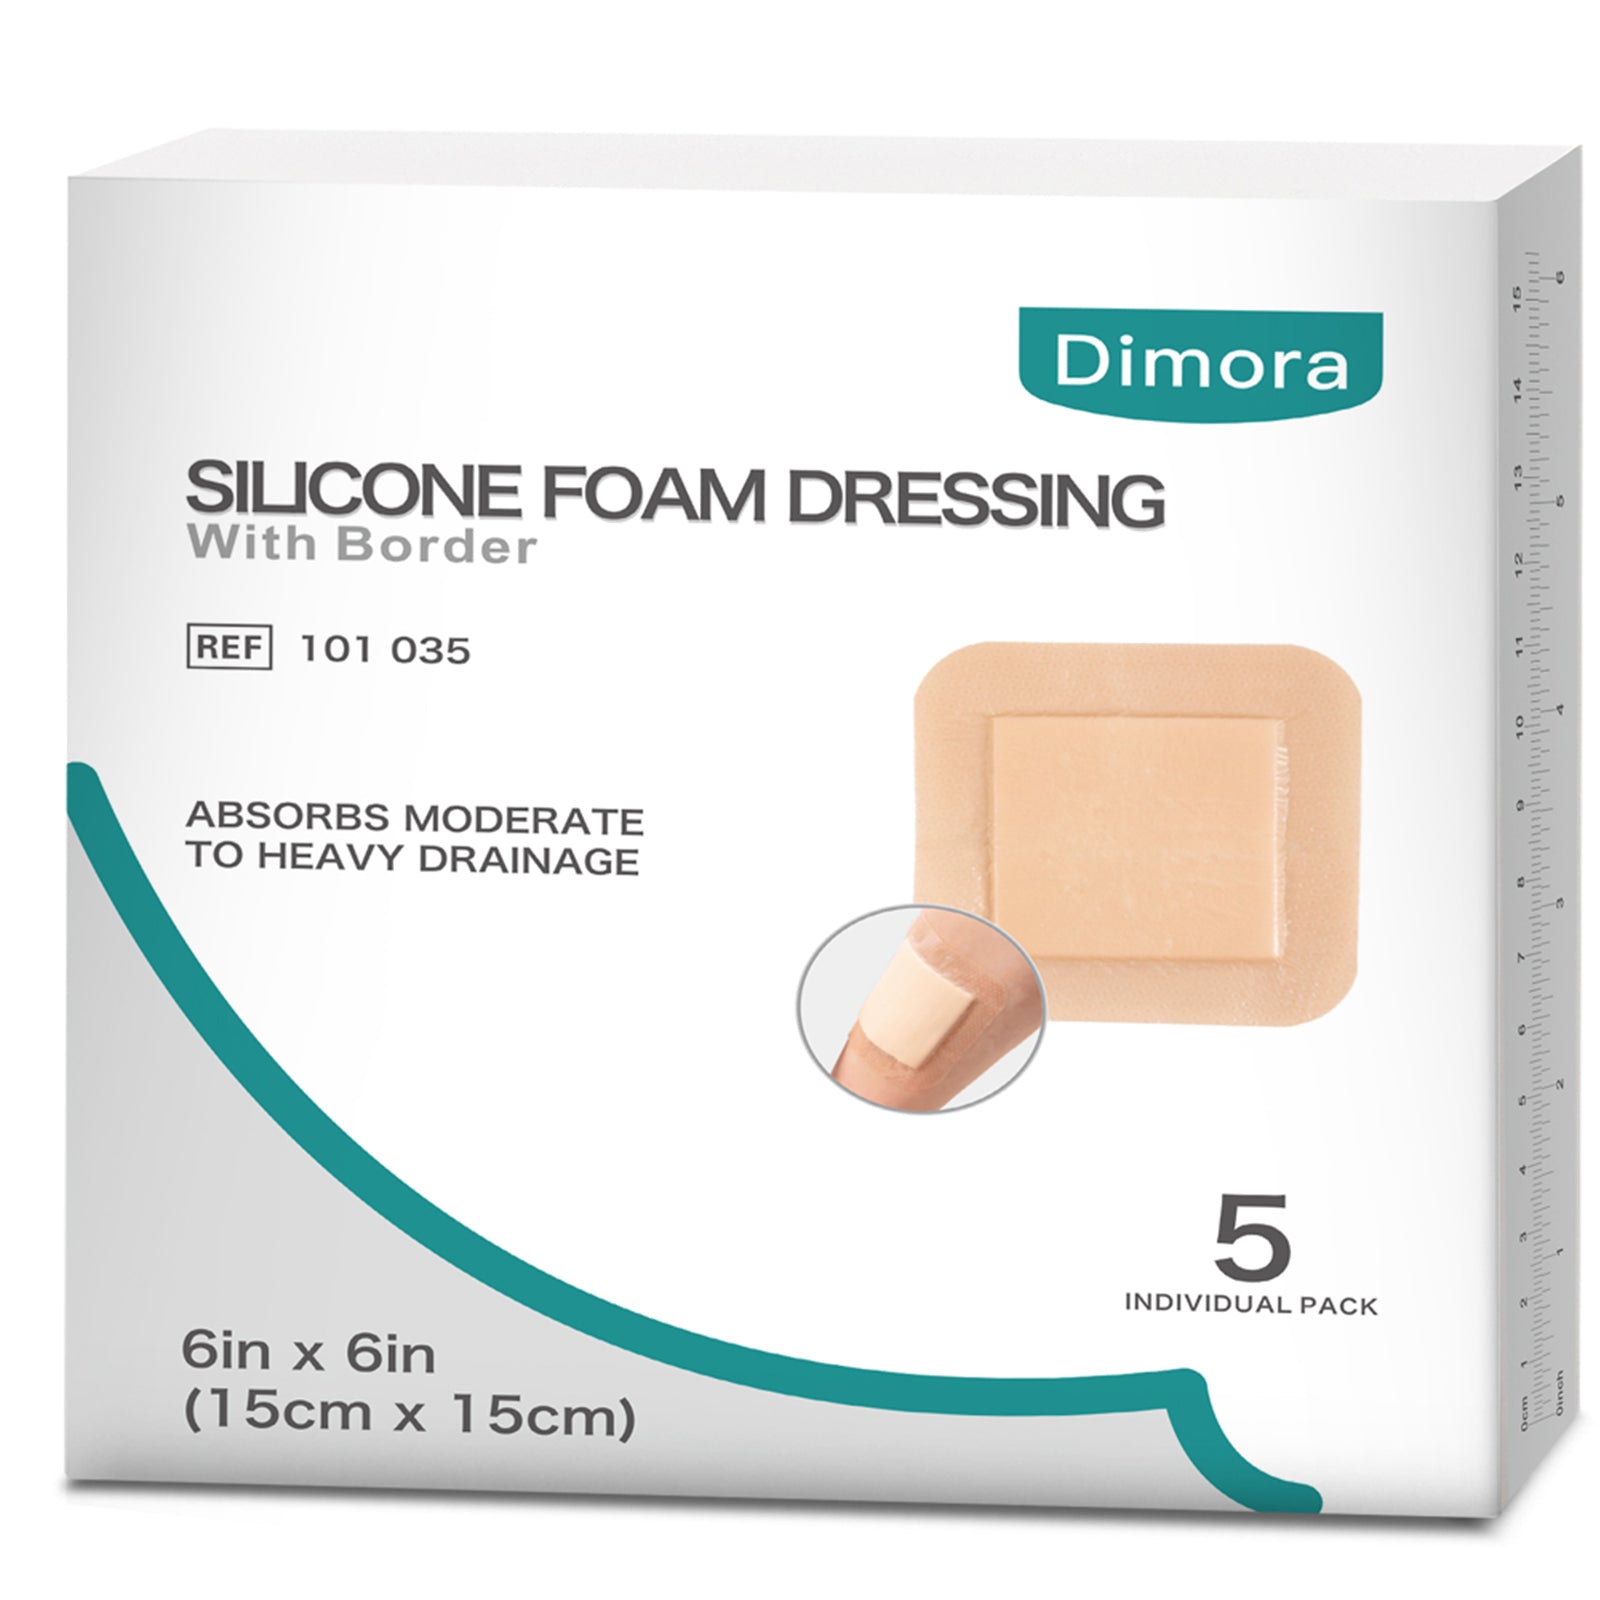 Dimora Silicone Foam Dressing With Border Adhesive Bedsore Bandages Foam Bandages for Pressure sores Bordered Foam Wound Dressing